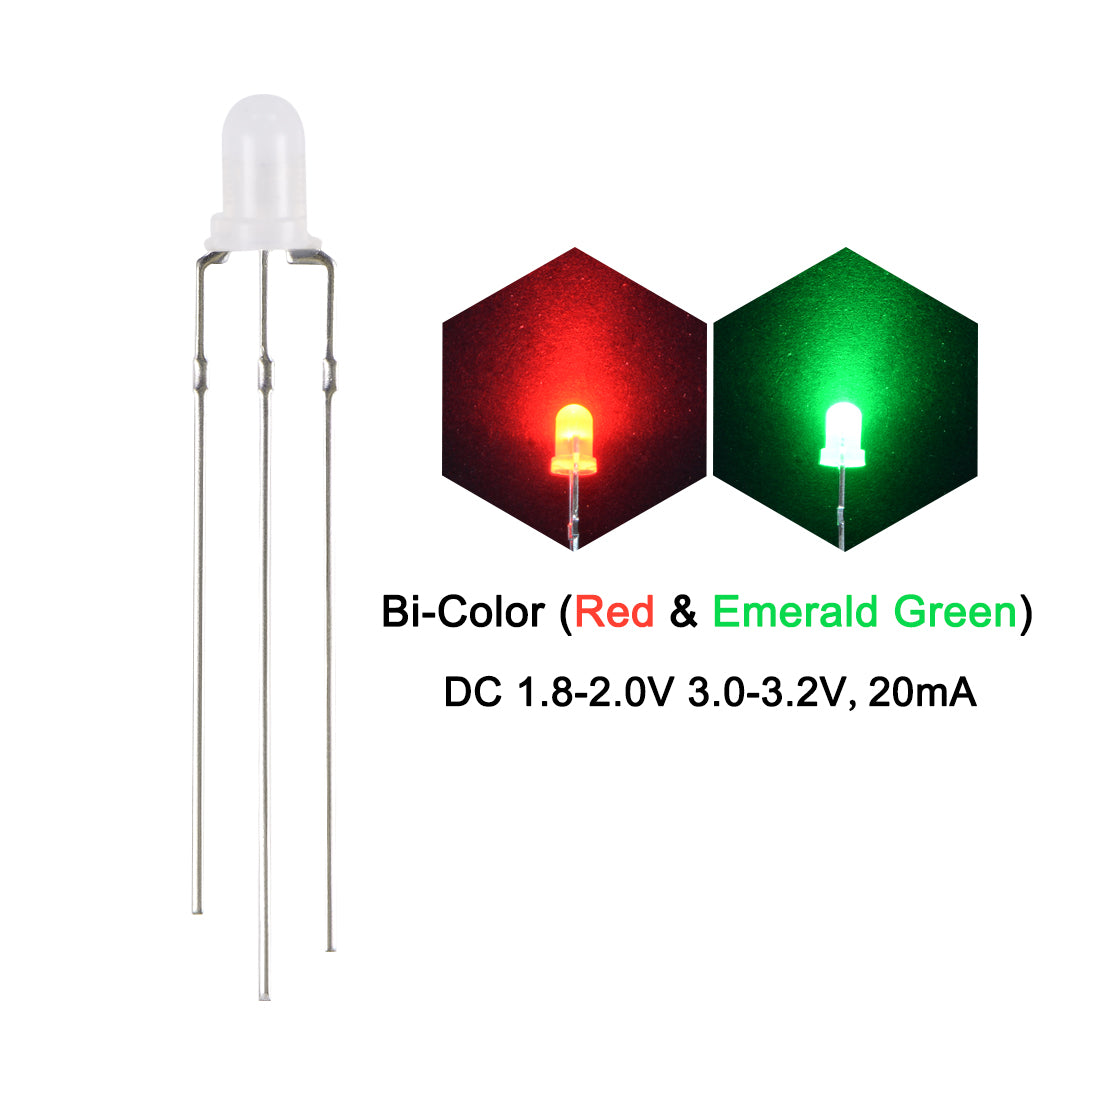 uxcell Uxcell 50Set 3mm LED Diodes Kit, Diffused Bi-Color (Red & Emerald Green), Common Anode